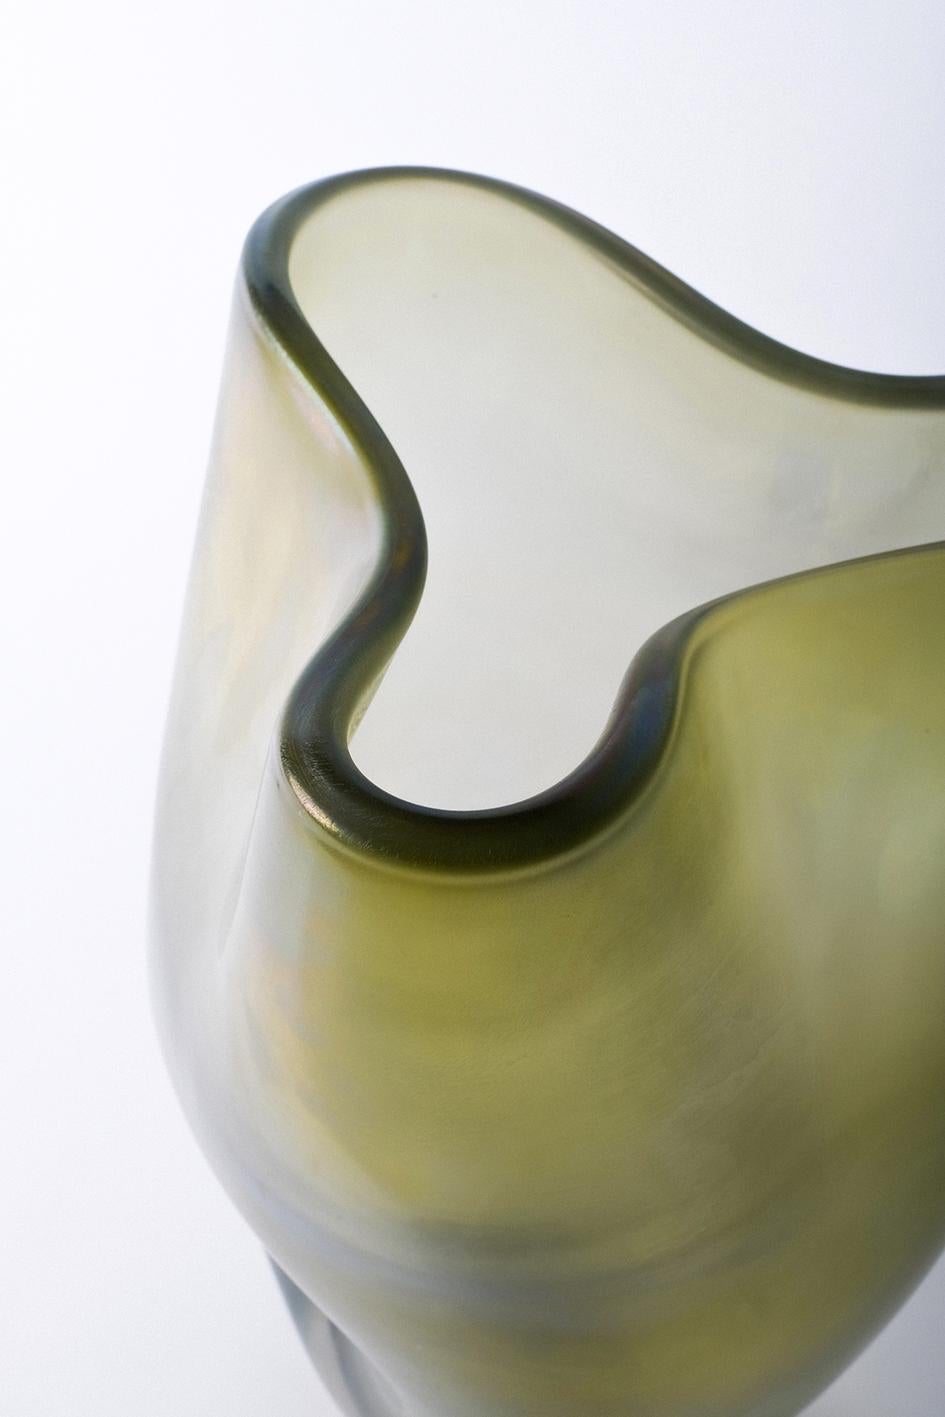 Bacan is a vase from the Laguna Collection designed by Ludovica+Roberto Palomba for Purho in spring 2022.
Characterised by generous forms with upper folded edges, Bacan —  which name refers to the sandy strip of land that emerges in the lagoon at